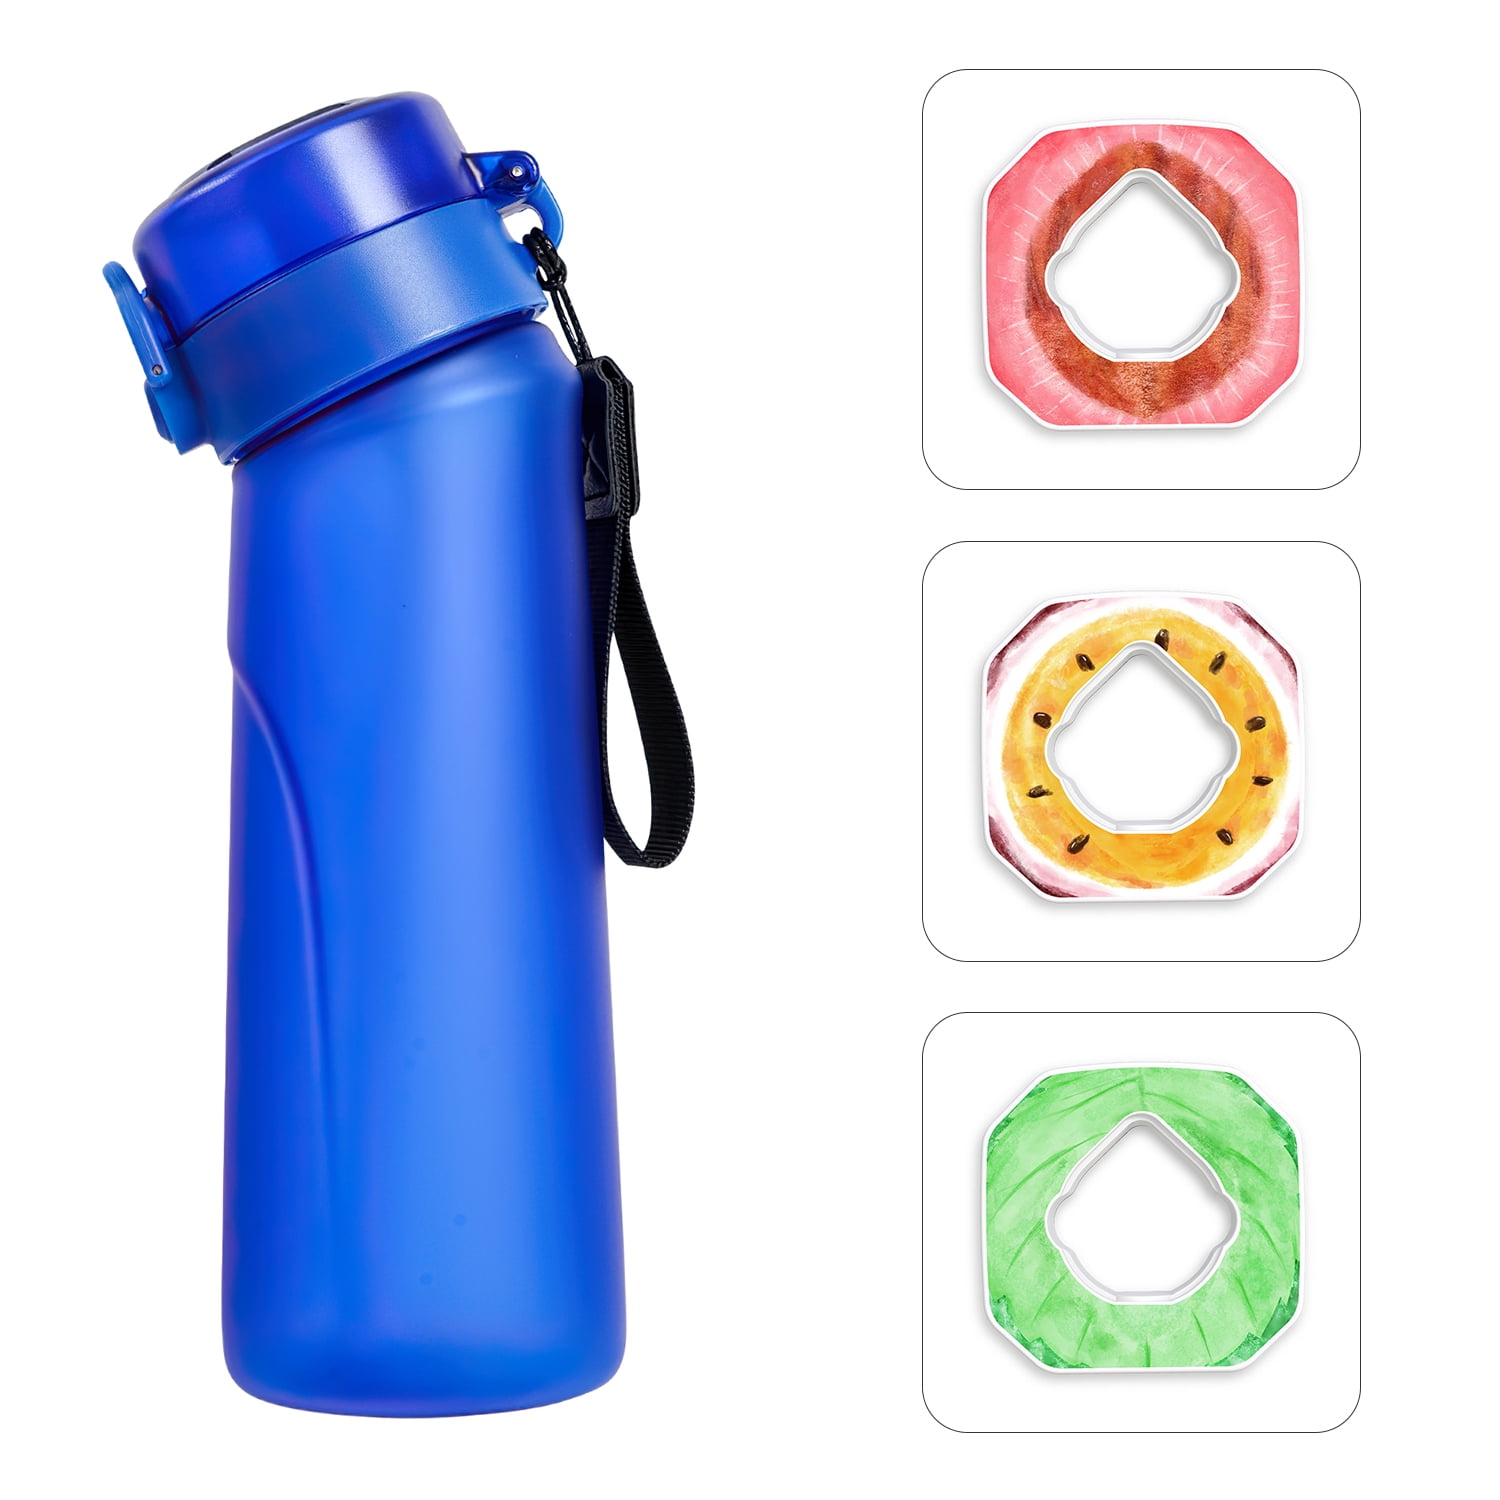 Hmess 650ML Water Bottle with 2 Flavour Pods Air Water Up Bottle